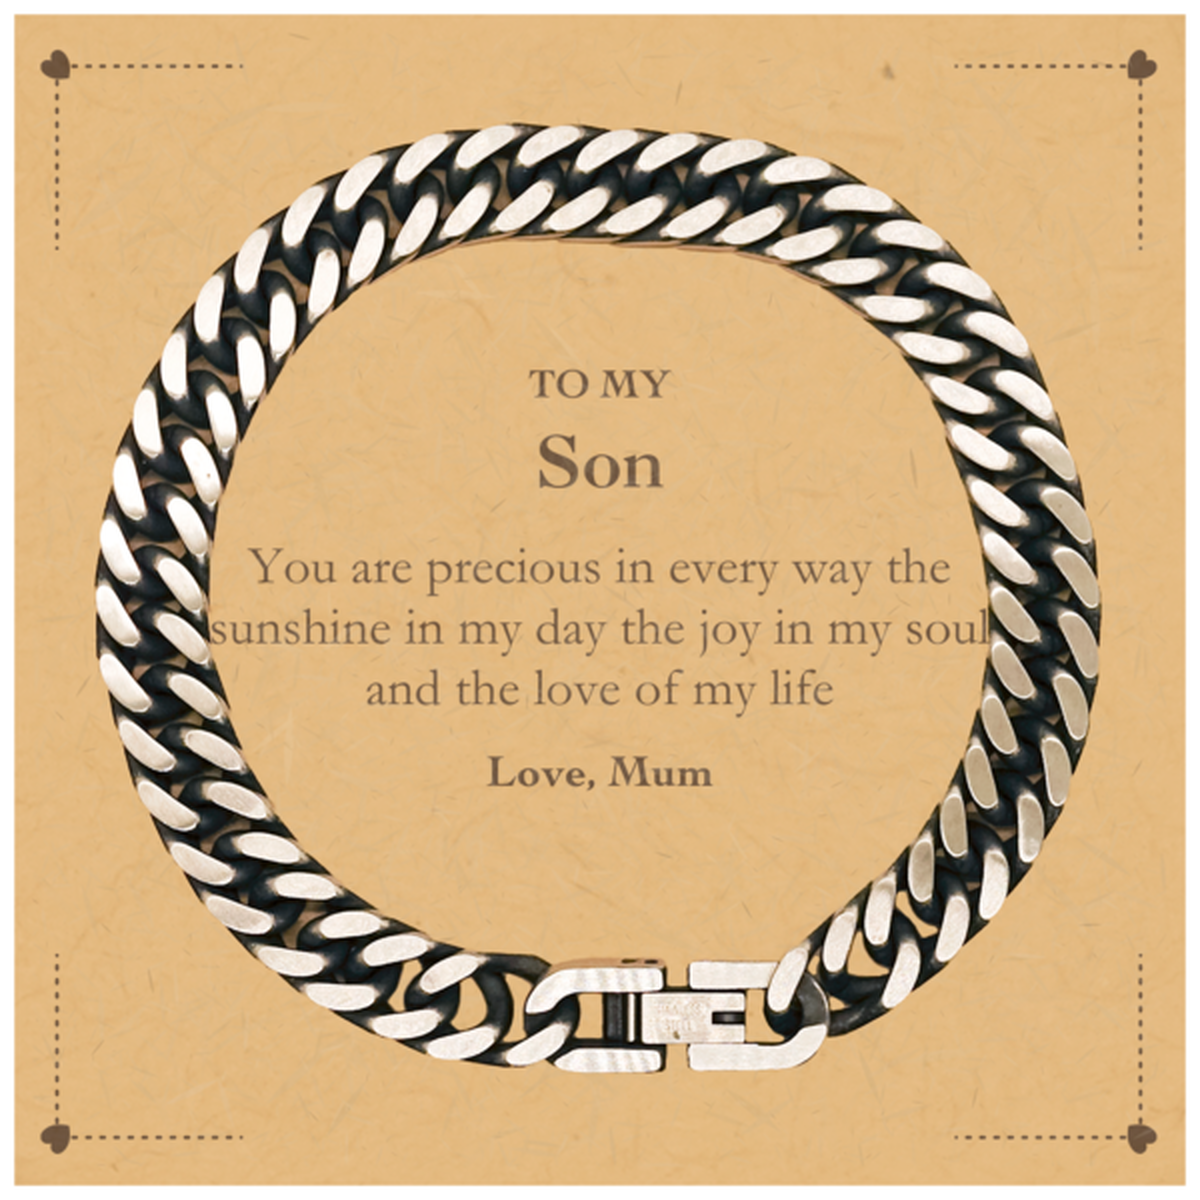 Graduation Gifts for Son Cuban Link Chain Bracelet Present from Mum, Christmas Son Birthday Gifts Son You are precious in every way the sunshine in my day. Love, Mum